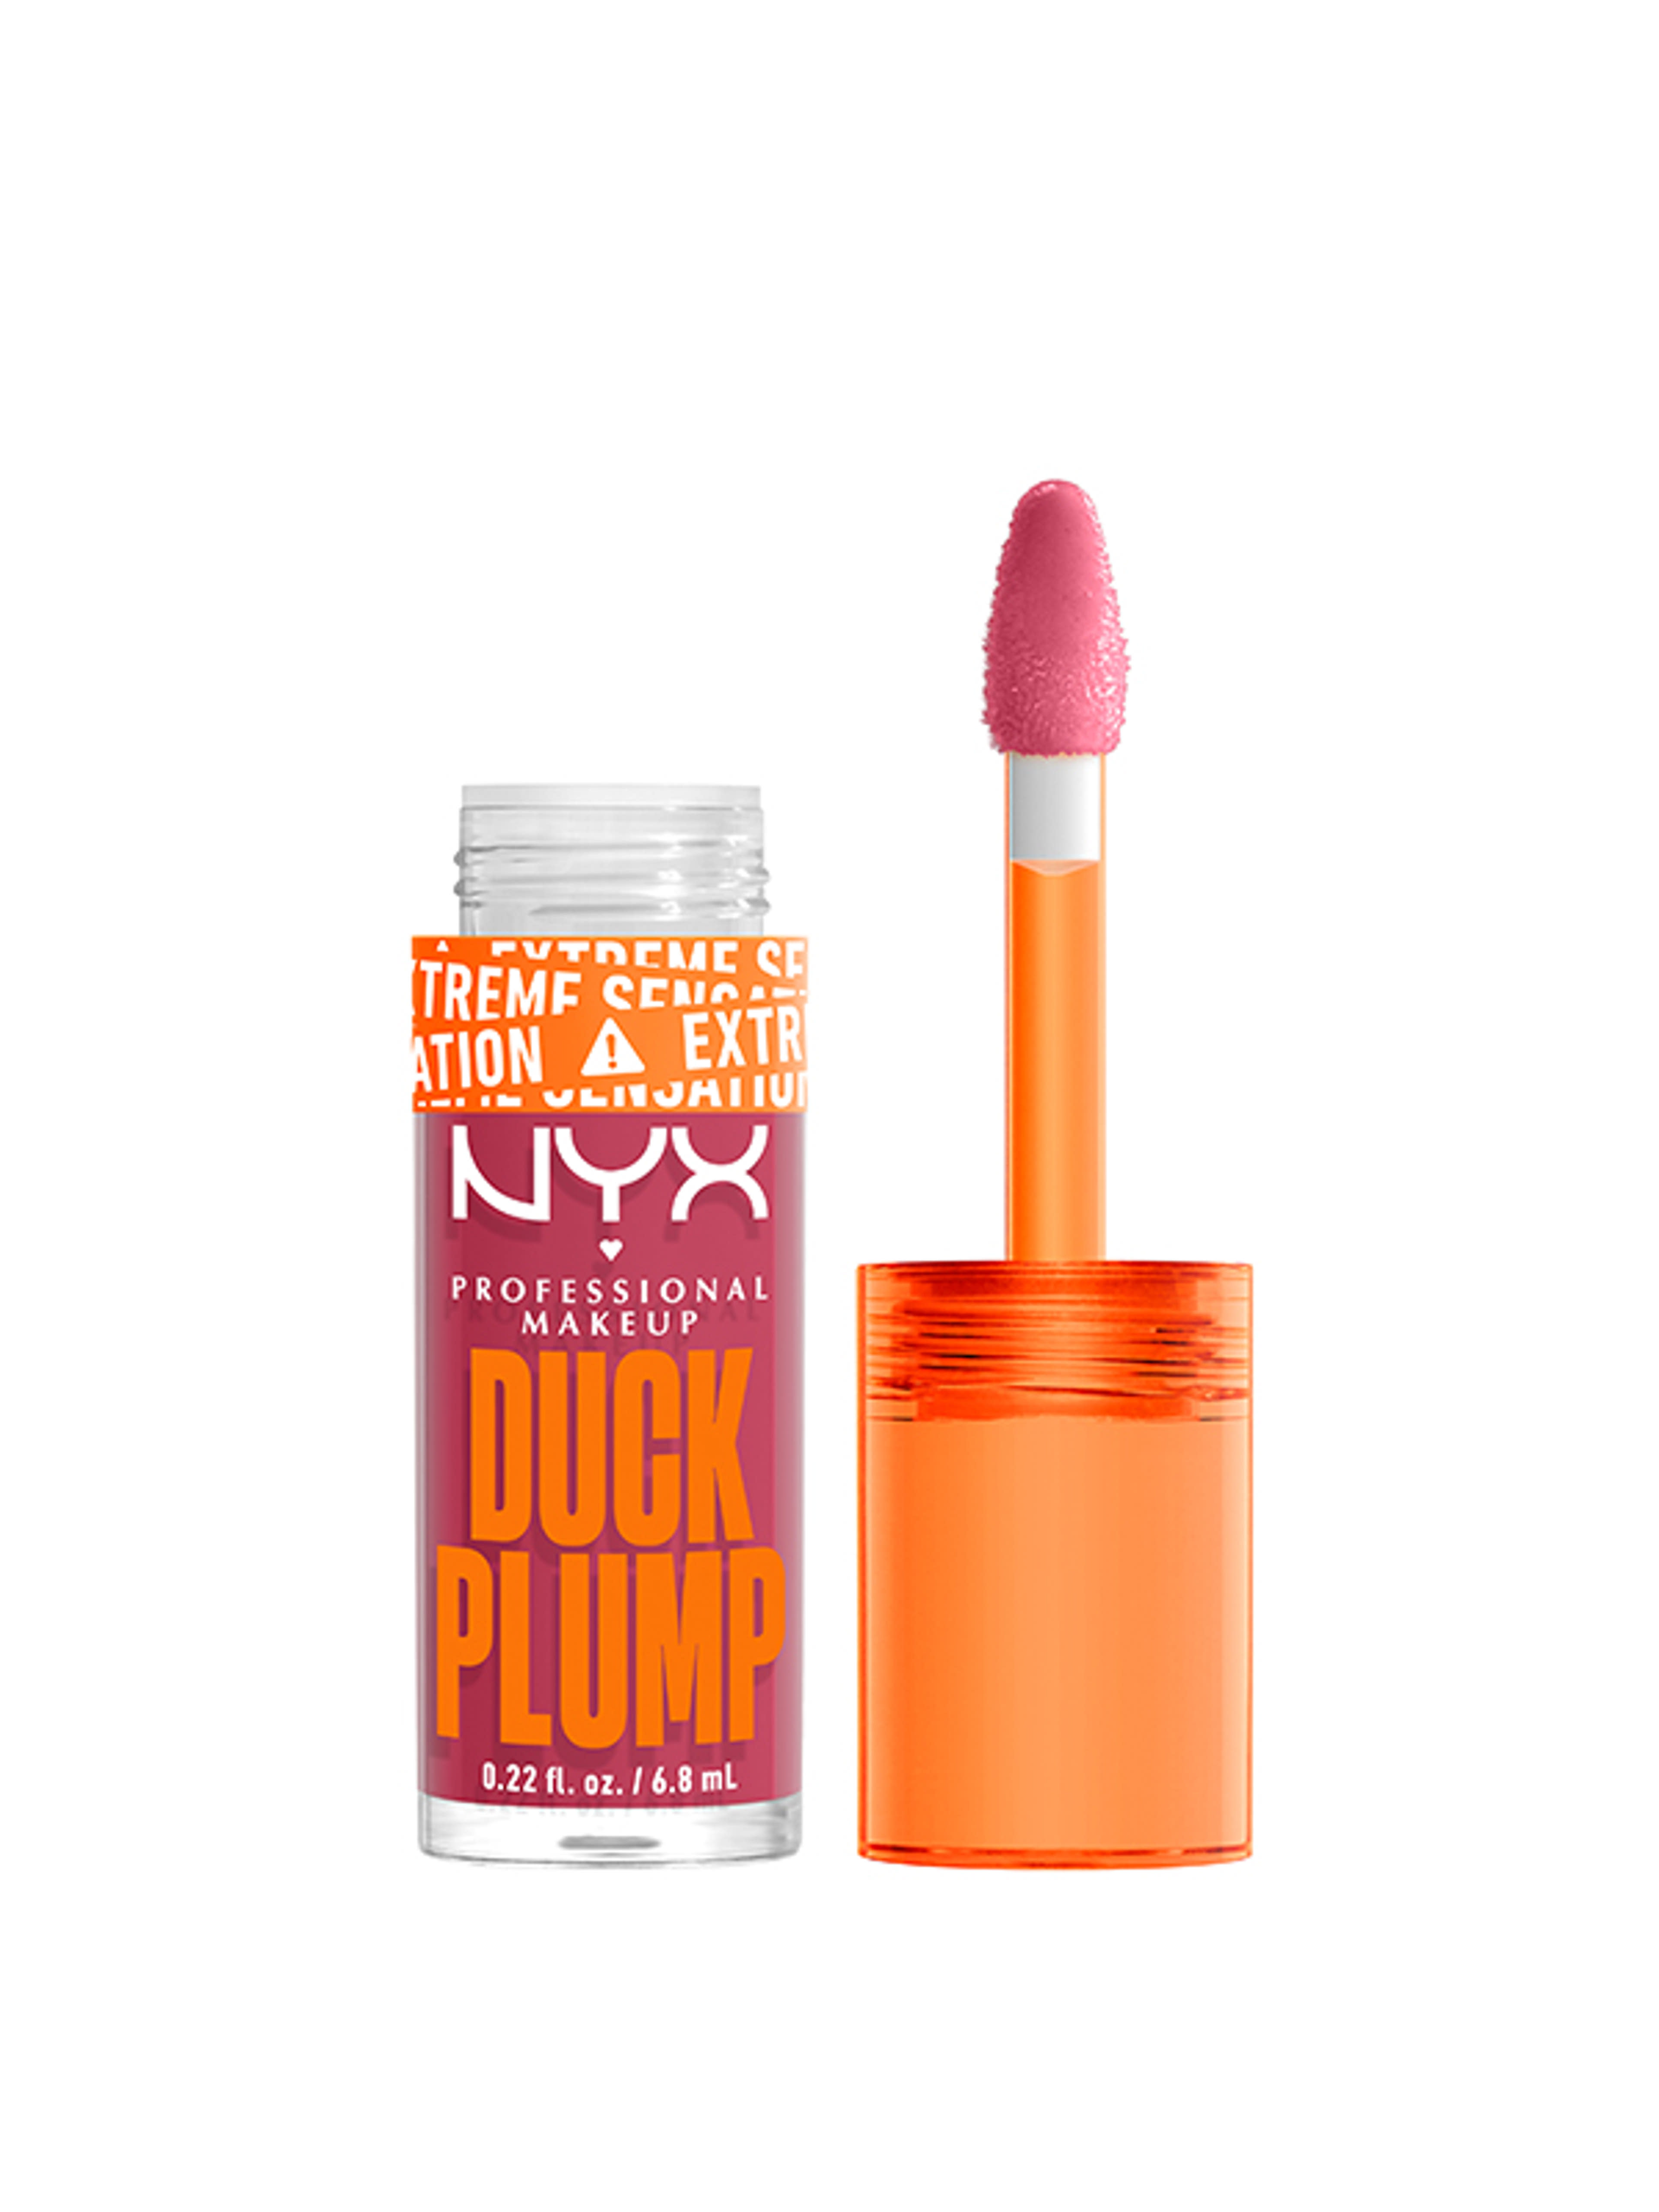 NYX Professional Makeup Duck Plump ajakfény /strike a pose - 1 db-2